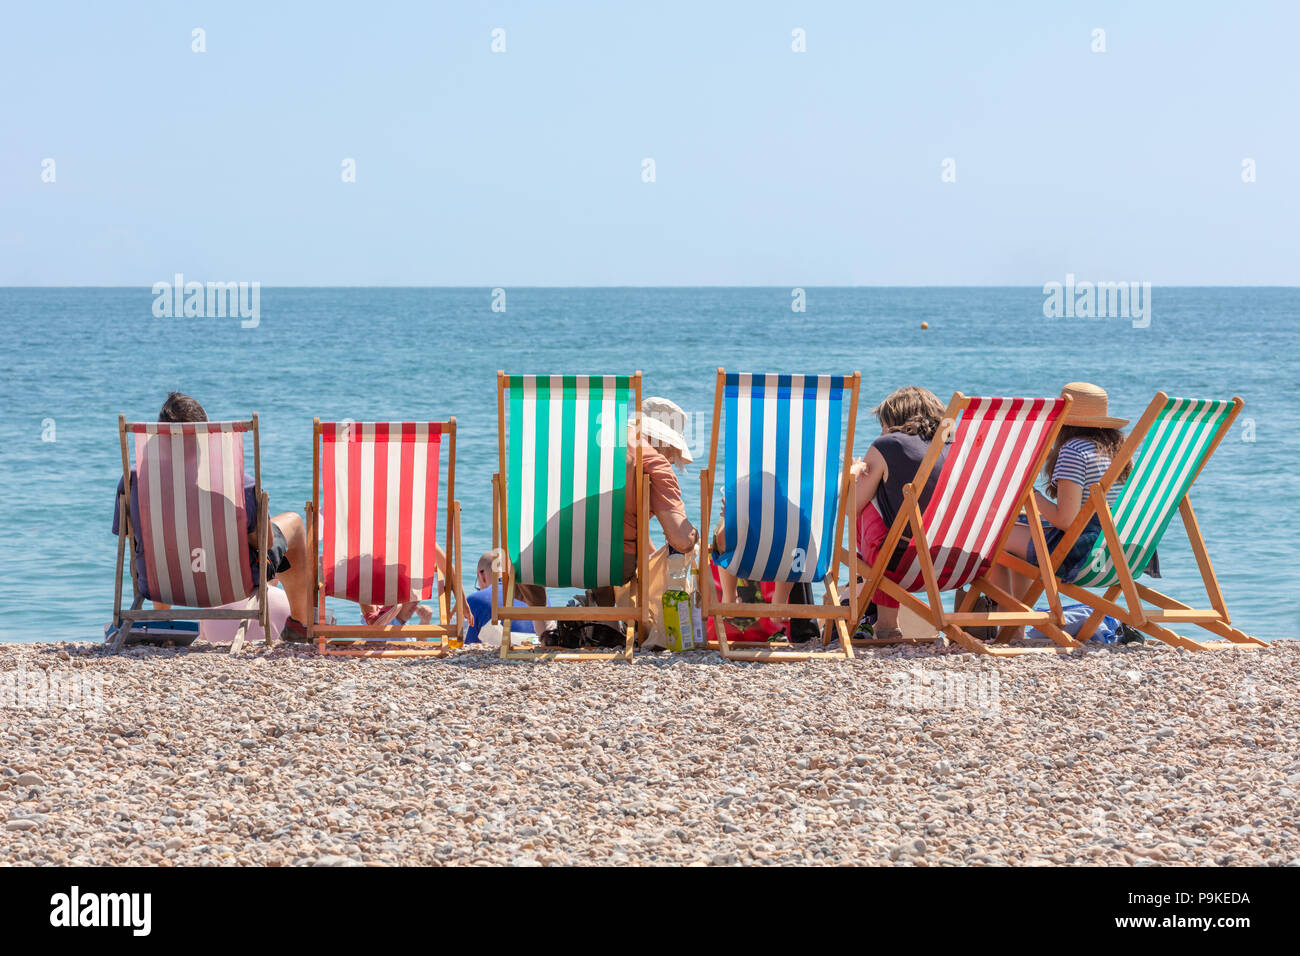 Rear View of Group of People Seated in Six Striped Deckchairs at the Seaside on a Bright Sunny Summer Day Stock Photo